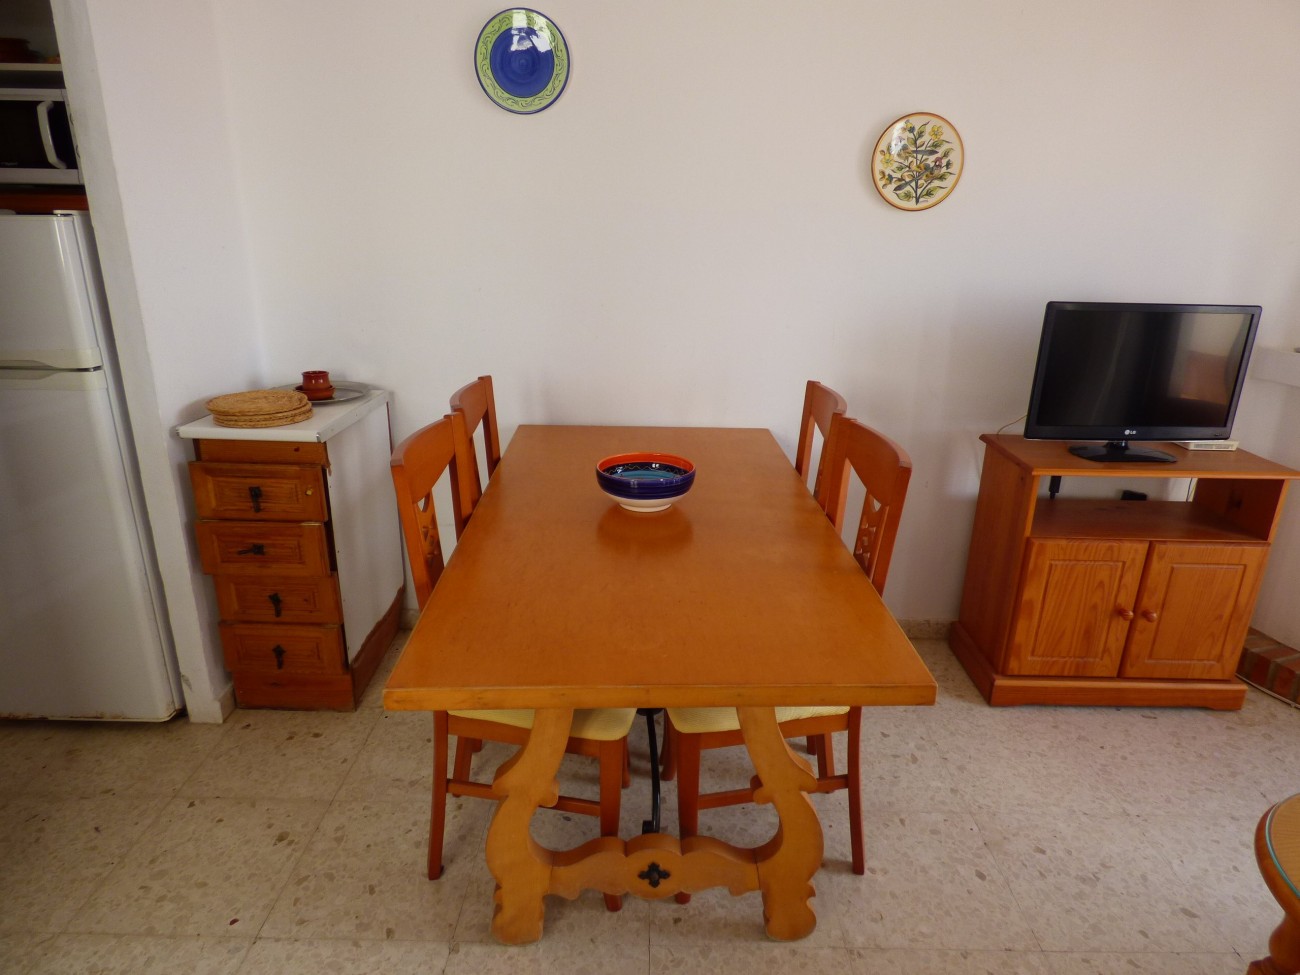 Apartment for sale in Nerja 5